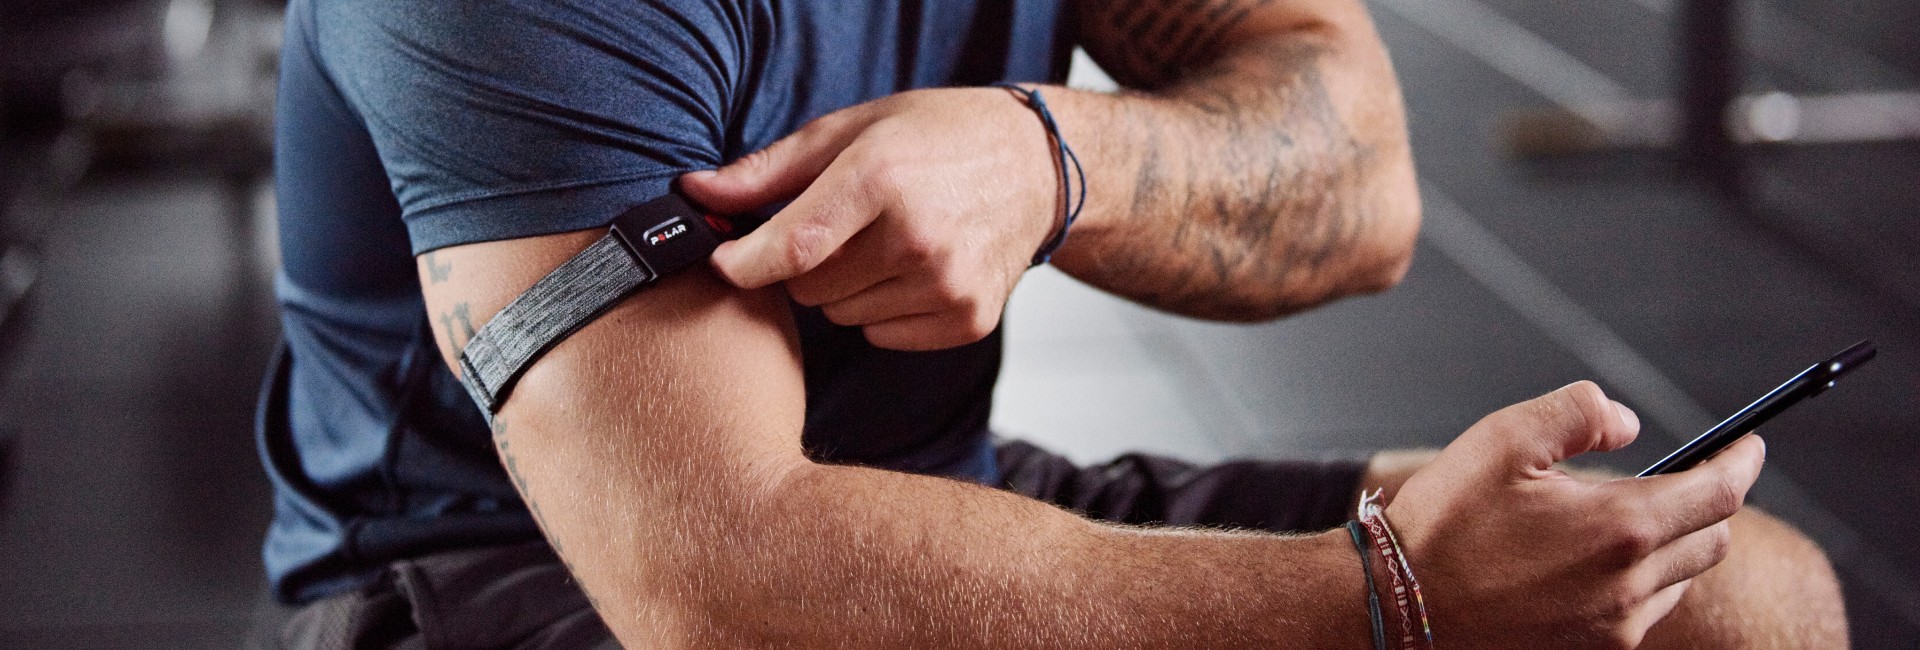 How to wear your OTBeat Core!  💥Have an OTBeat Core Heart Rate Monitor?  💥 If so, here are a couple of tips to ensure that it is applied properly  to track